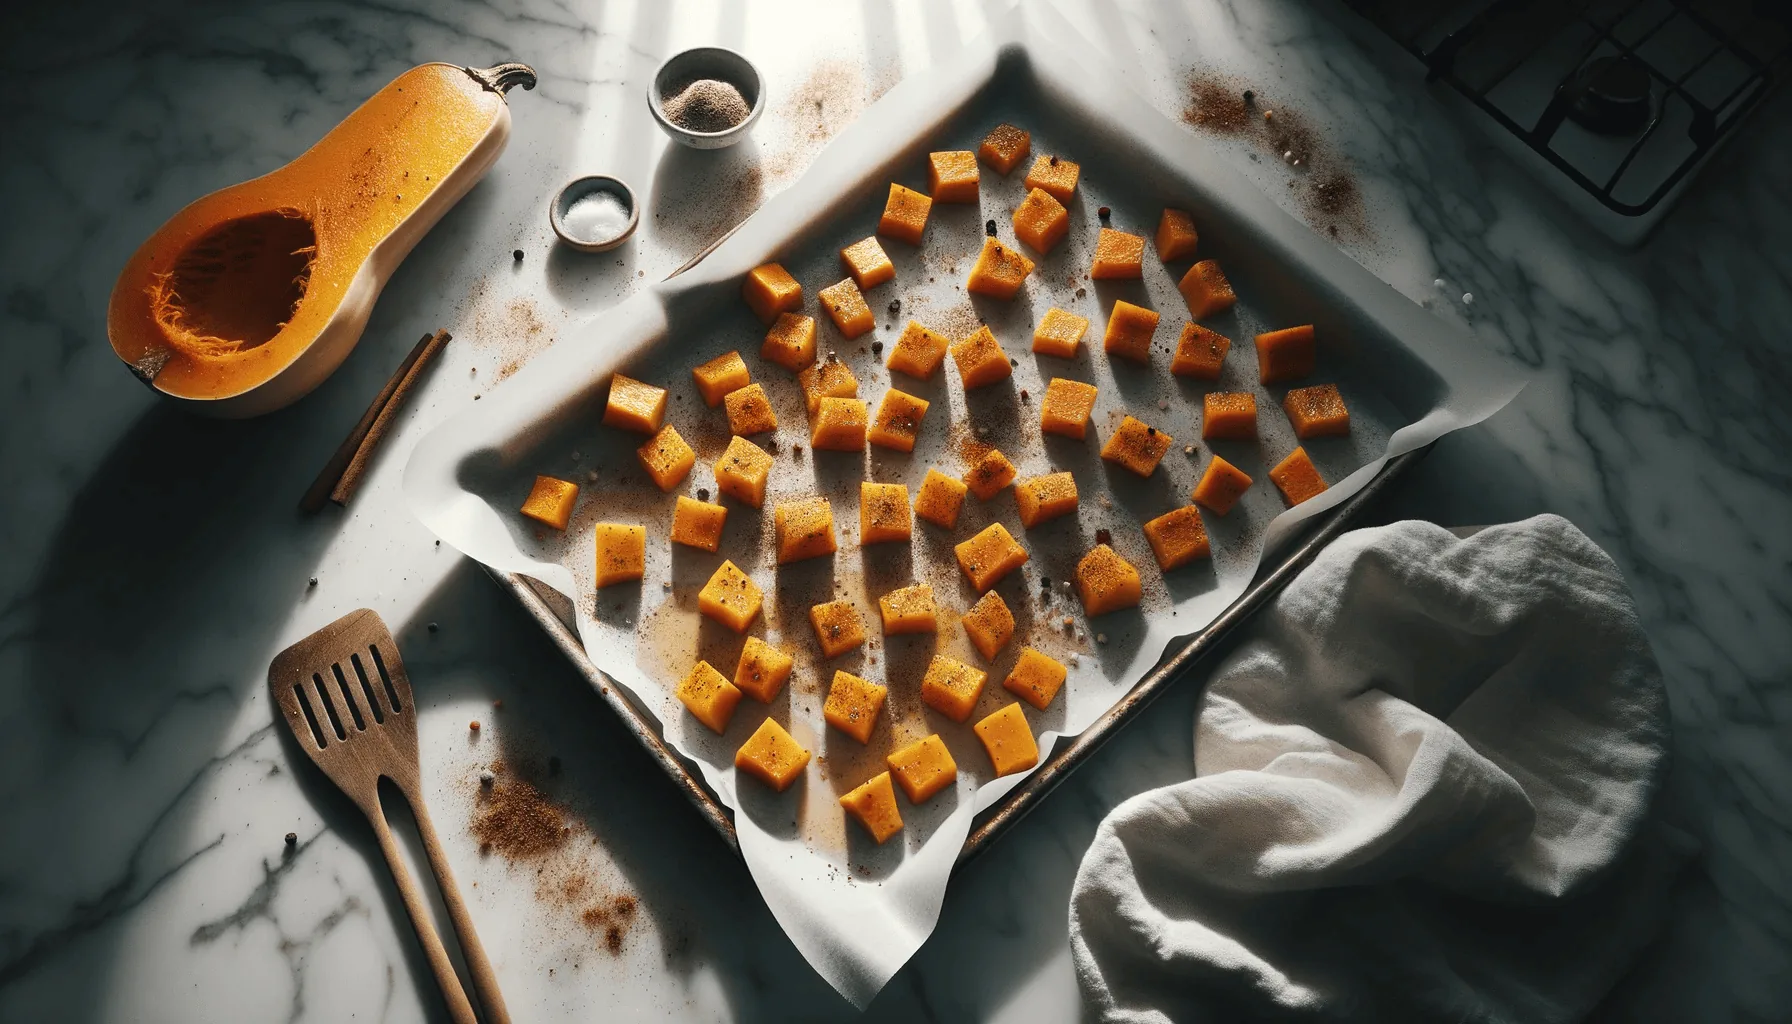 The making of cinnamon-roasted butternut squash